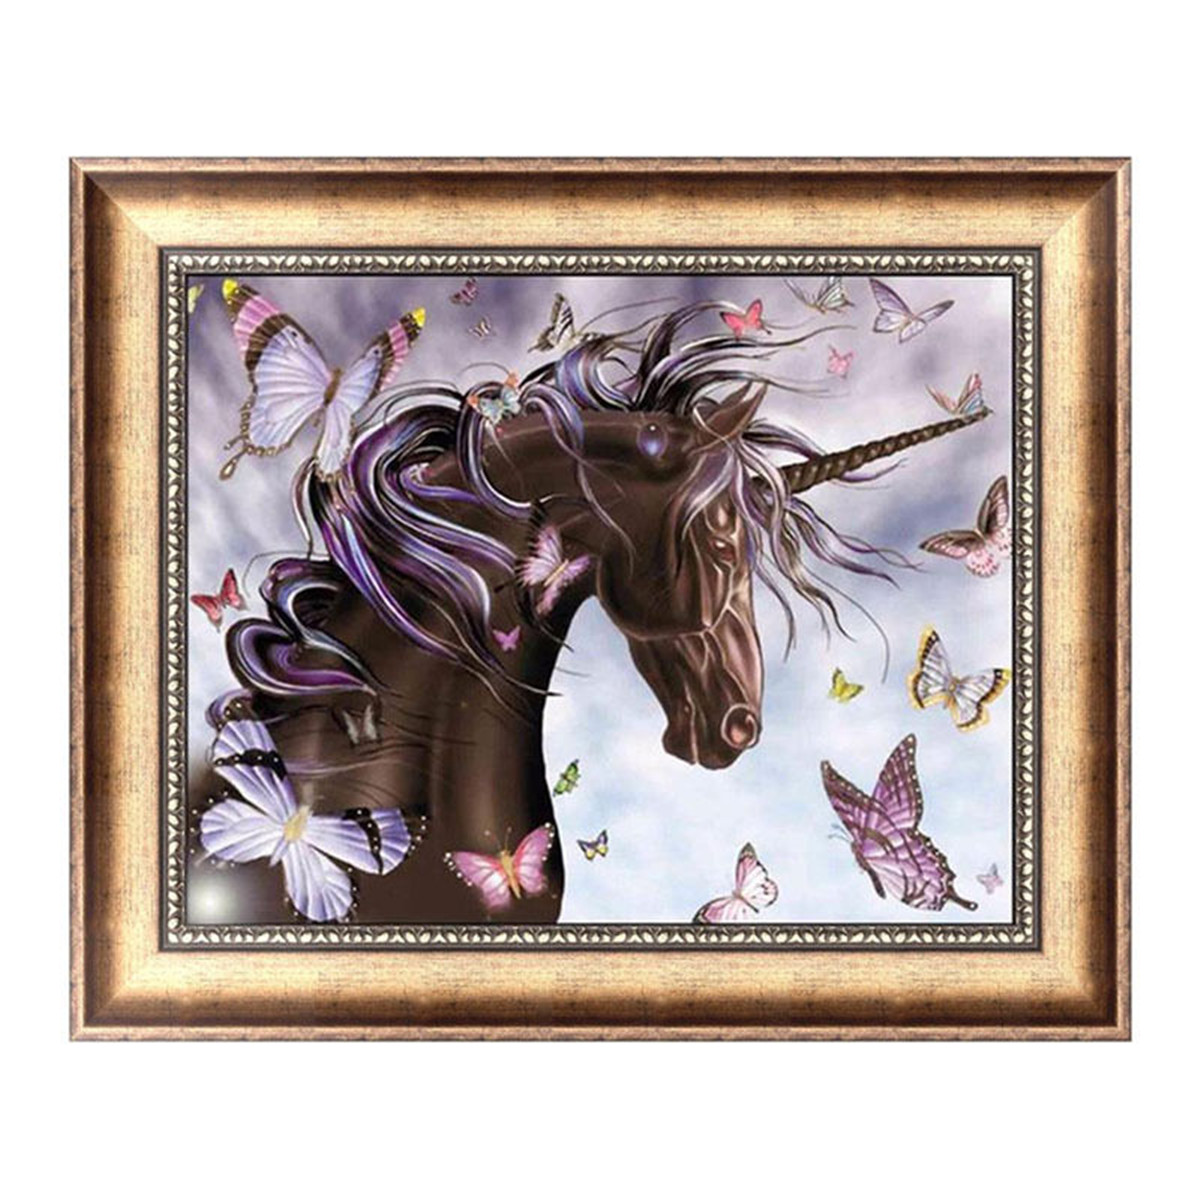 Horse-Butterfly-5D-Diamond-Embroidery-Painting-Cross-Stitch-DIY-Painting-Tools-Handmade-Wall-Decorat-1747742-2